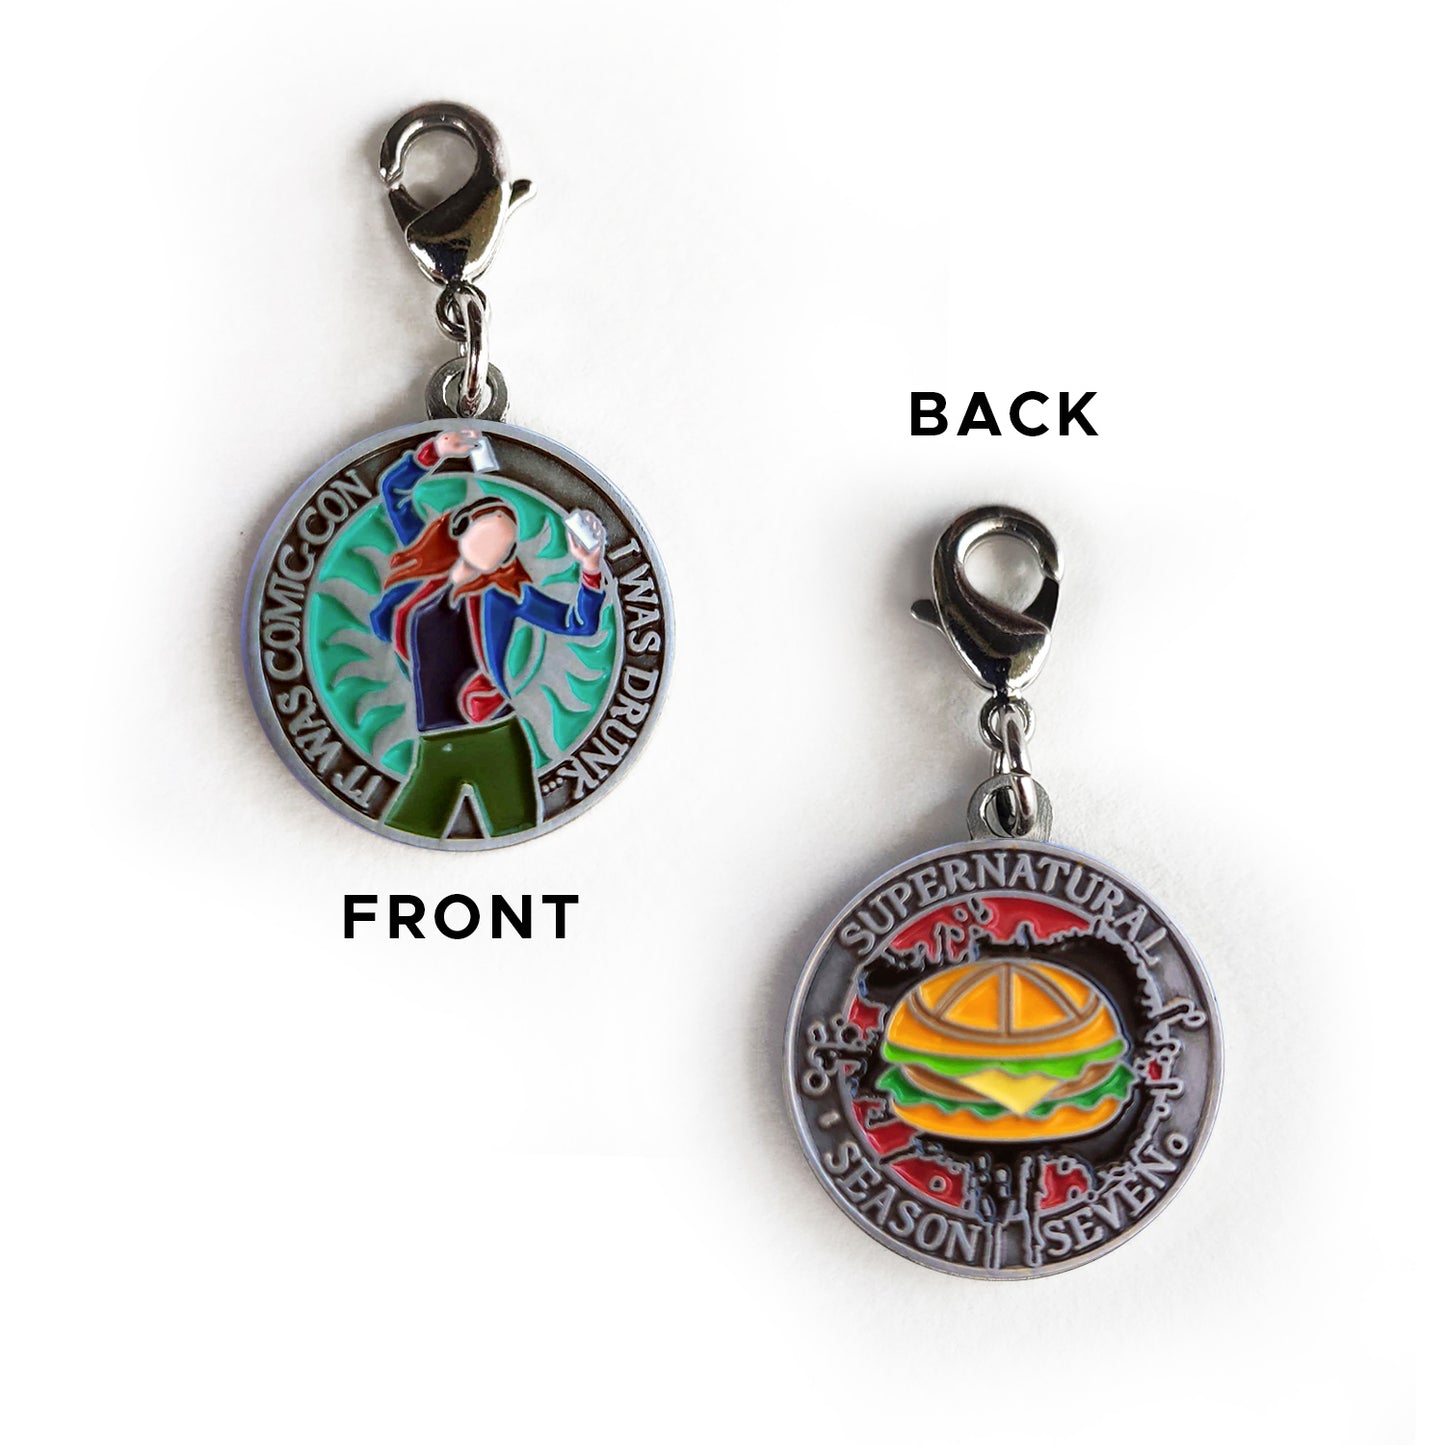 A brass coin with "Supernatural season seven" and a burger against a red and black background on one side and "It was comic-con. I was drunk." with teal background, an anti-possession symbol, and a sillhouette of Charlie Bradbury on the other.